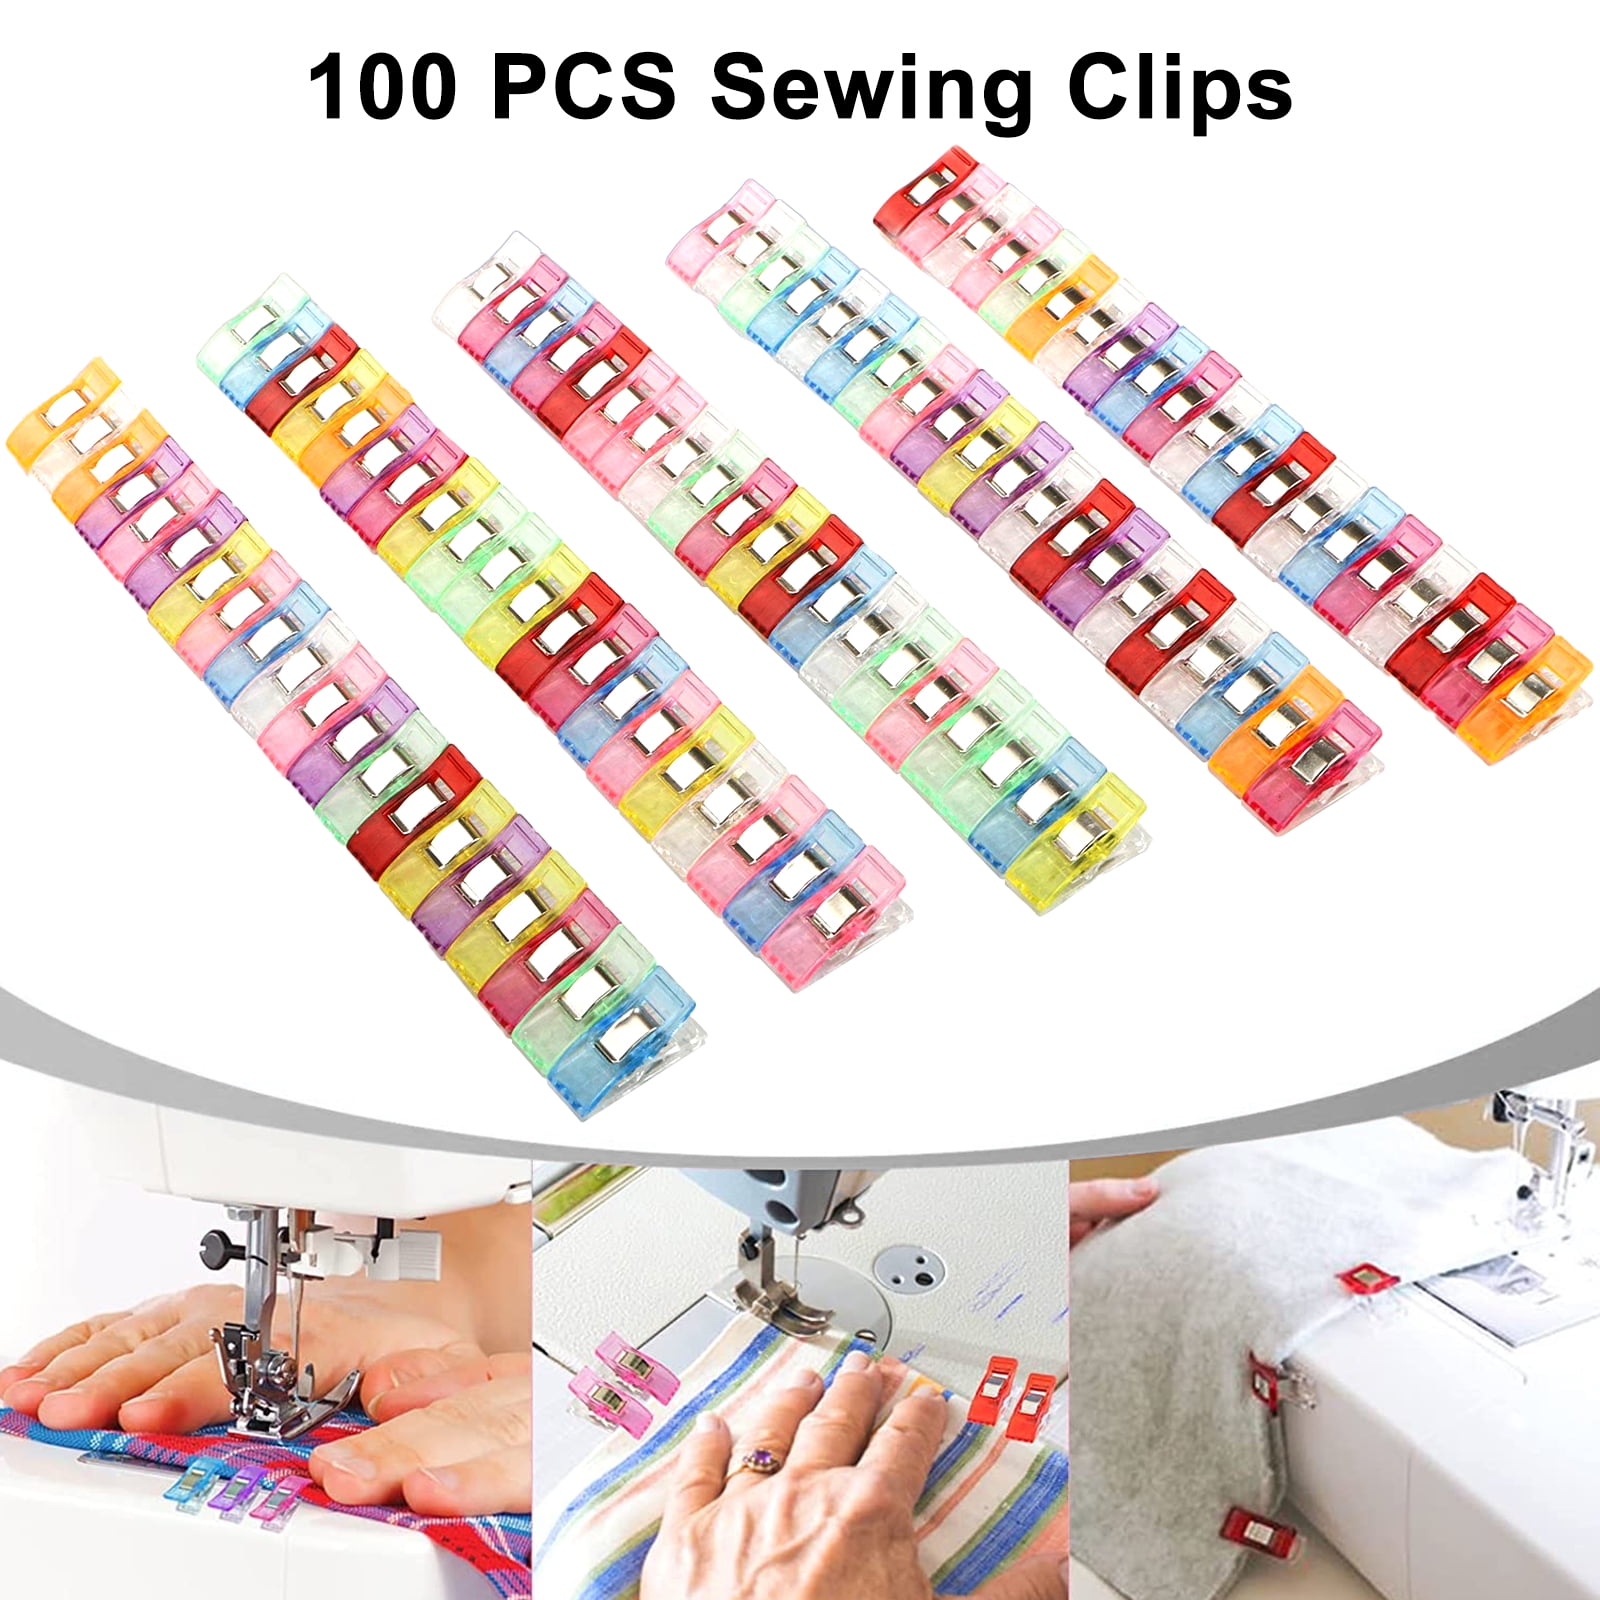 100 Pack Sewing Clips, TSV Multipurpose Quilting Clips Wonder Craft Binding  Cips for Sewing, Quilting, Fabric Knitting, Paper and Photo Clamp